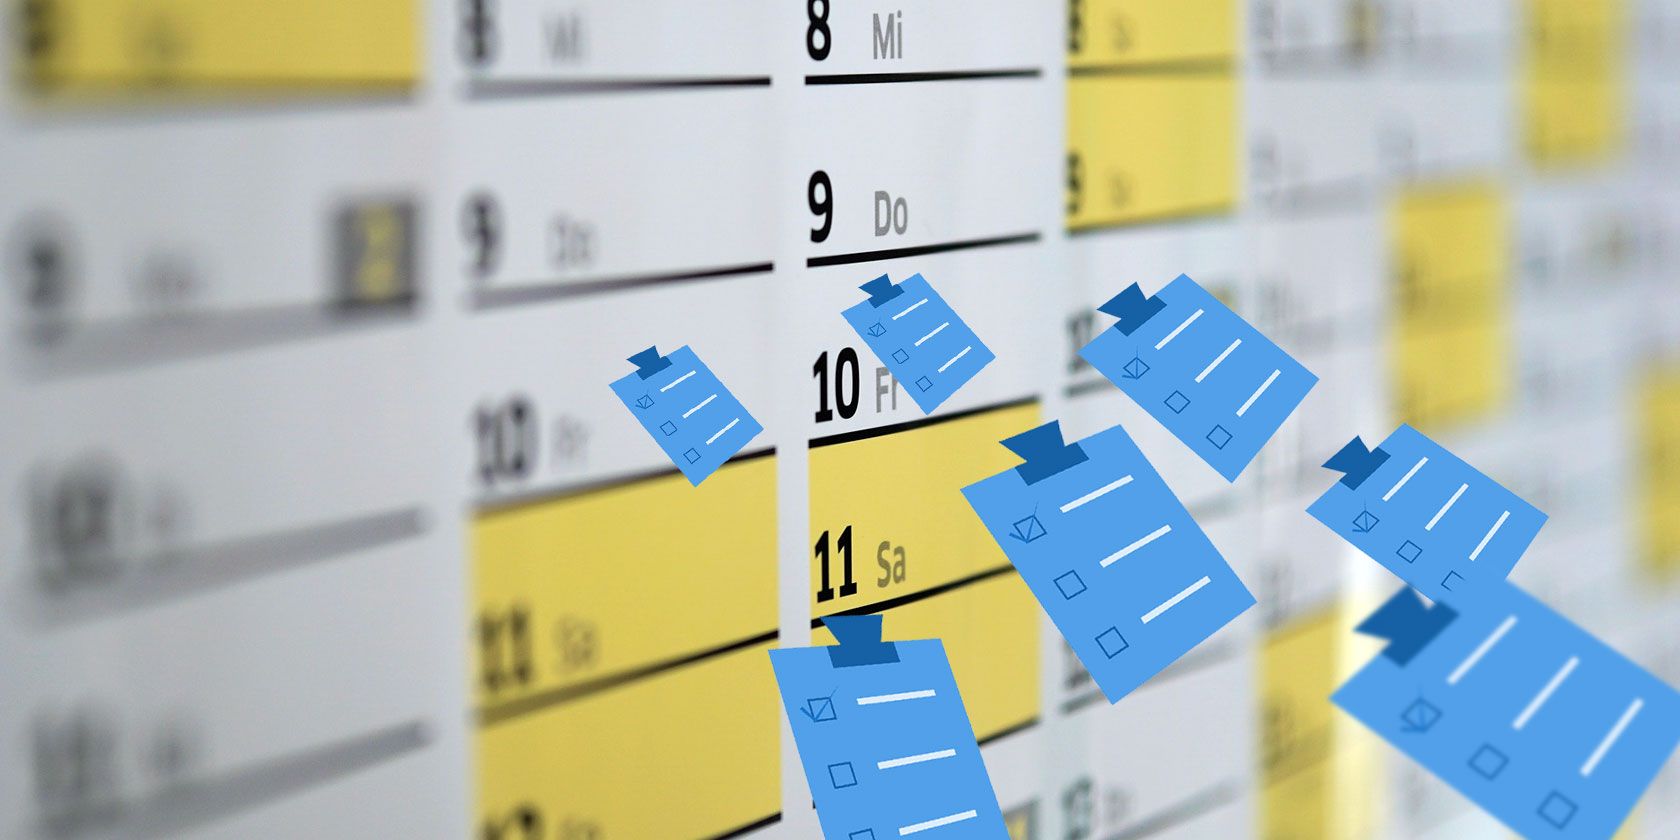 How to Sync Your Google Calendar With Your ToDo List